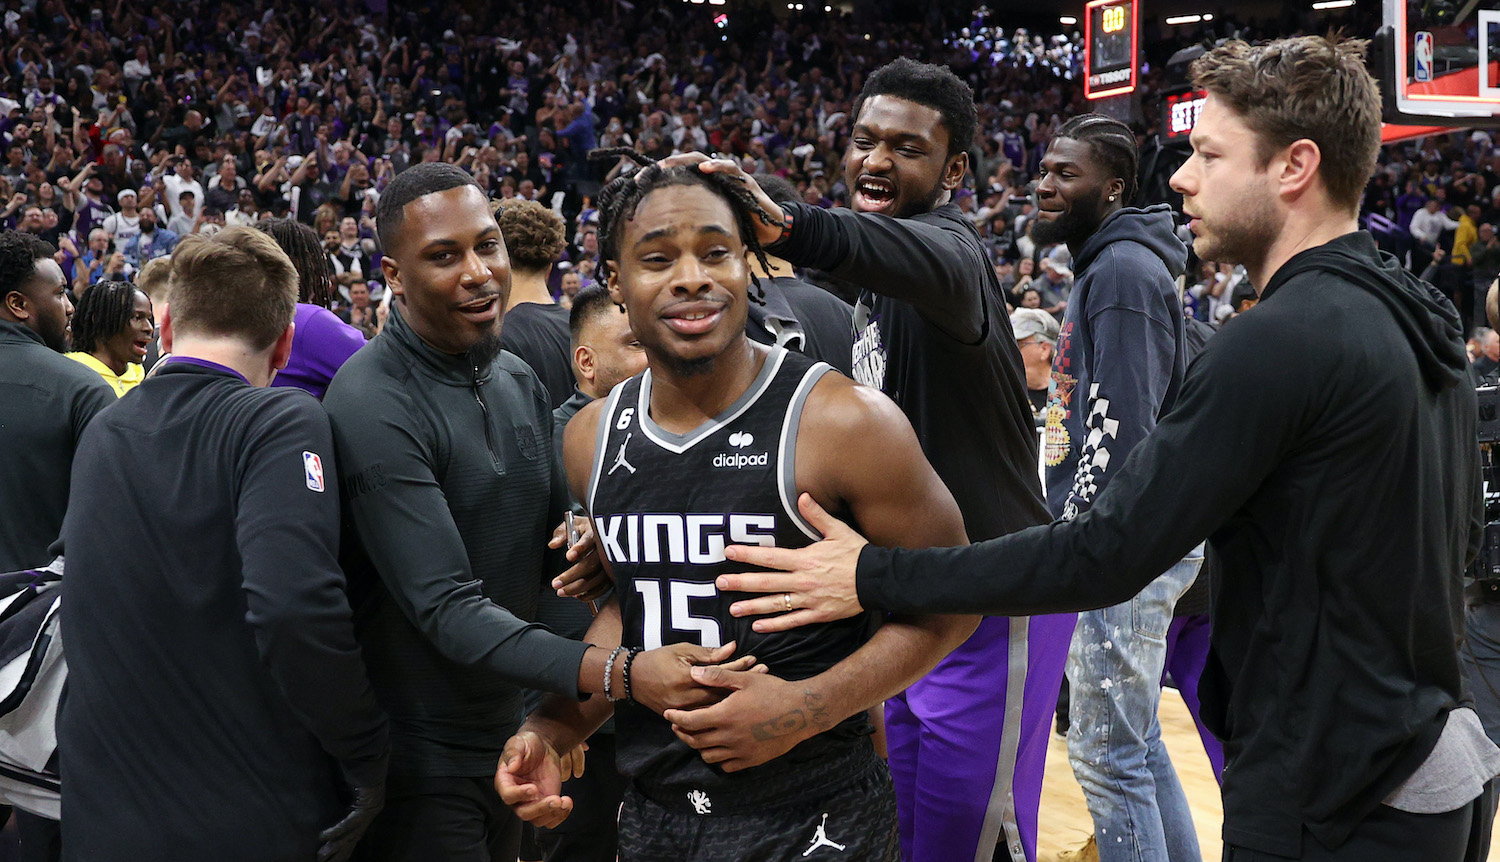 SACRAMENTO, CALIFORNIA - APRIL 17: Davion Mitchell #15 of the Sacramento Kings is congratulated by teammates after they beat the Golden State Warriors in Game Two of the Western Conference First Round Playoffs at Golden 1 Center on April 17, 2023 in Sacramento, California. NOTE TO USER: User expressly acknowledges and agrees that, by downloading and or using this photograph, User is consenting to the terms and conditions of the Getty Images License Agreement. (Photo by Ezra Shaw/Getty Images)